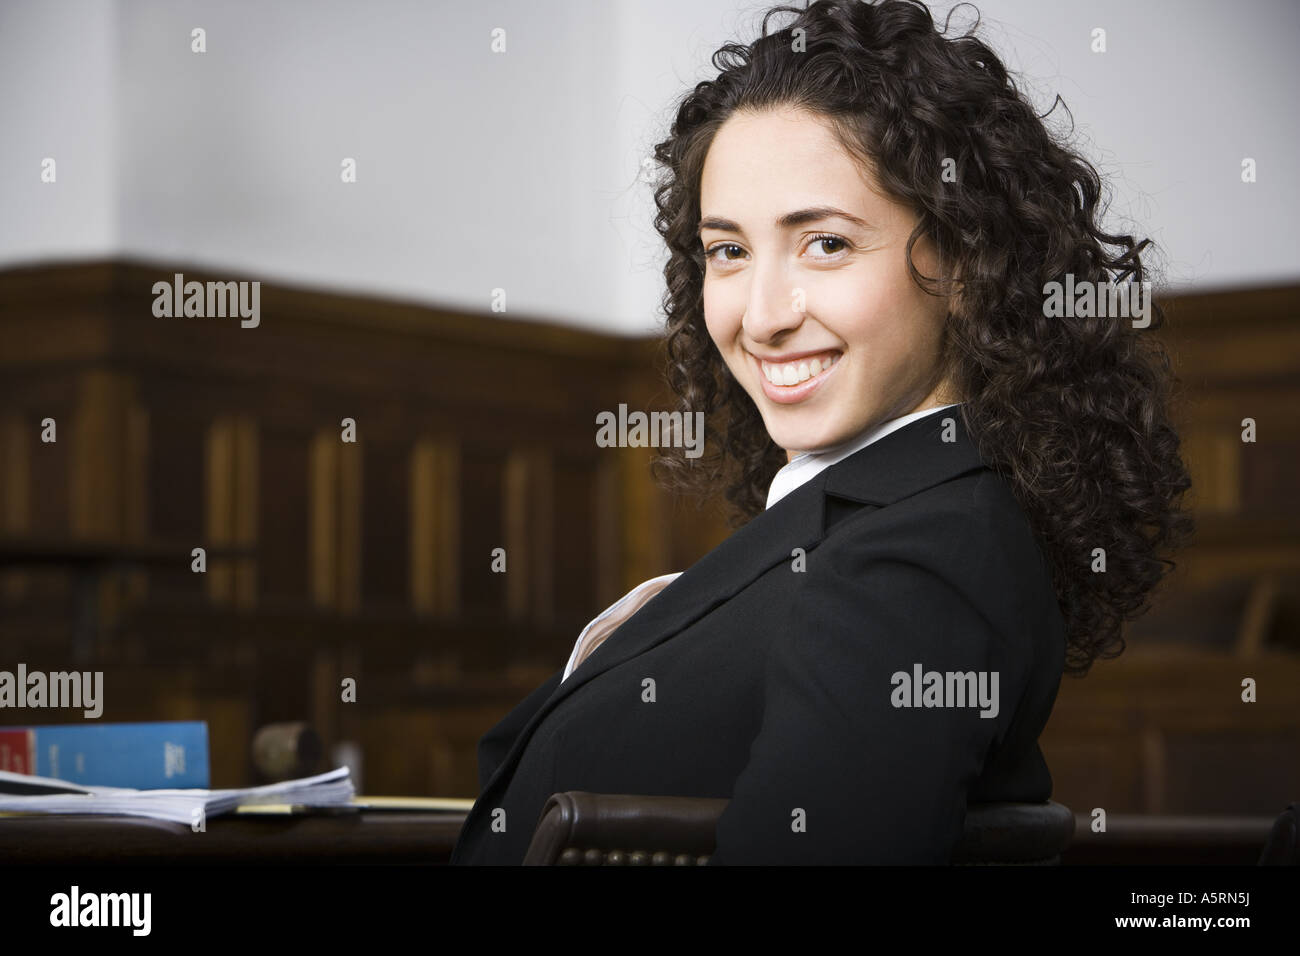 Female lawyer smiling in courtroom Stock Photo